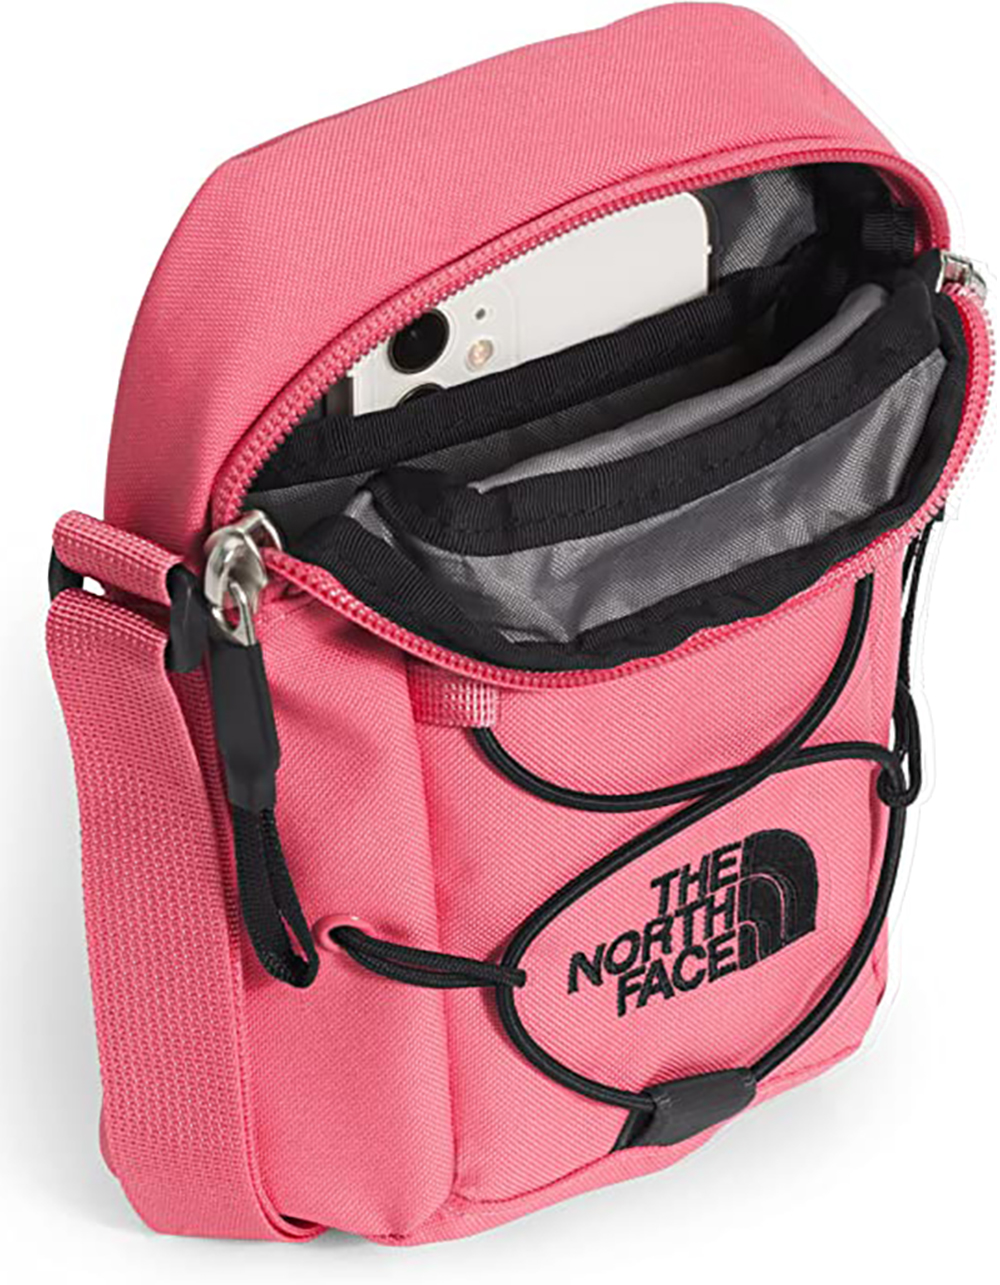 THE NORTH FACE - PINK Jester Bag Crossbody | Tillys